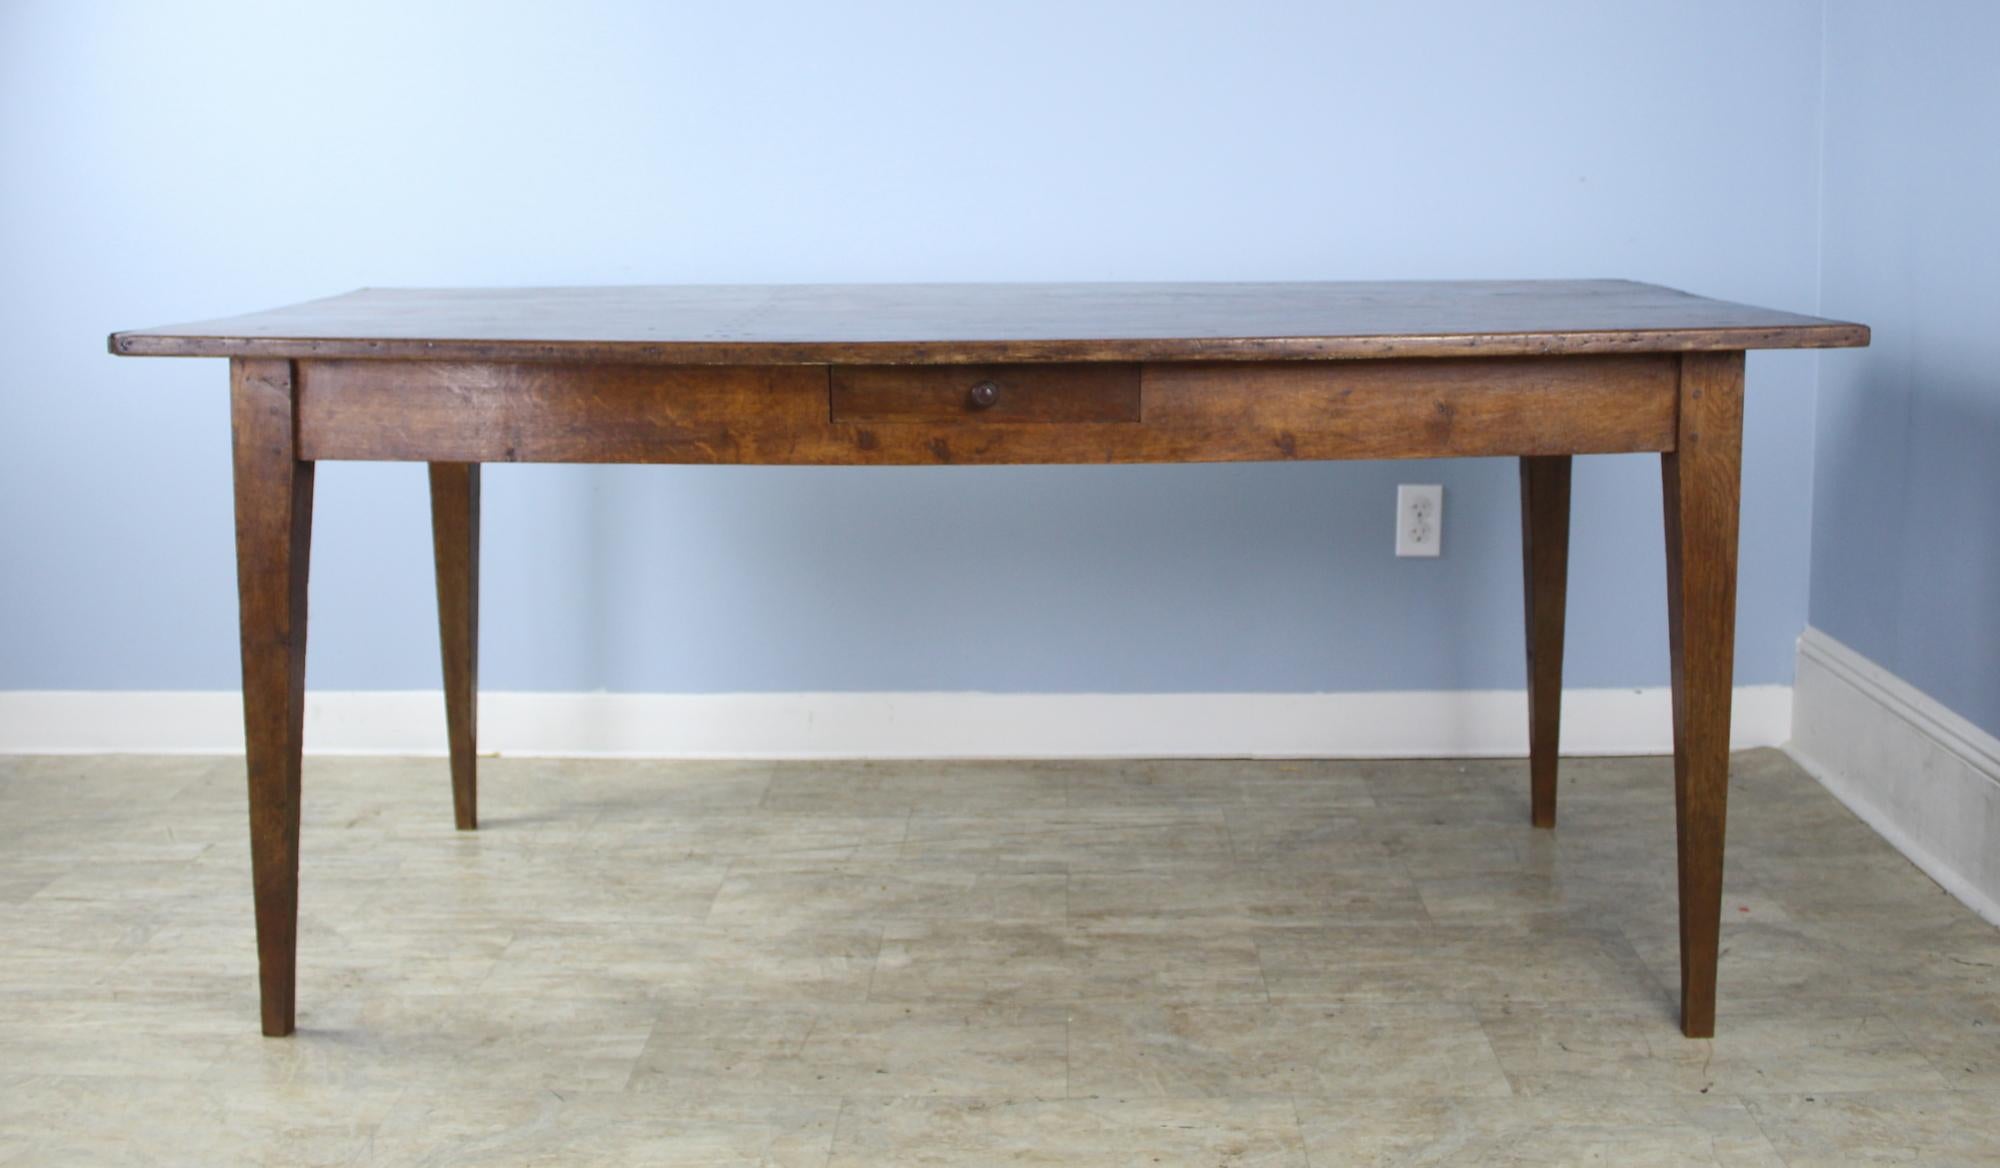 French Antique Oak Farm Table with Decorative Edge and Single Drawer